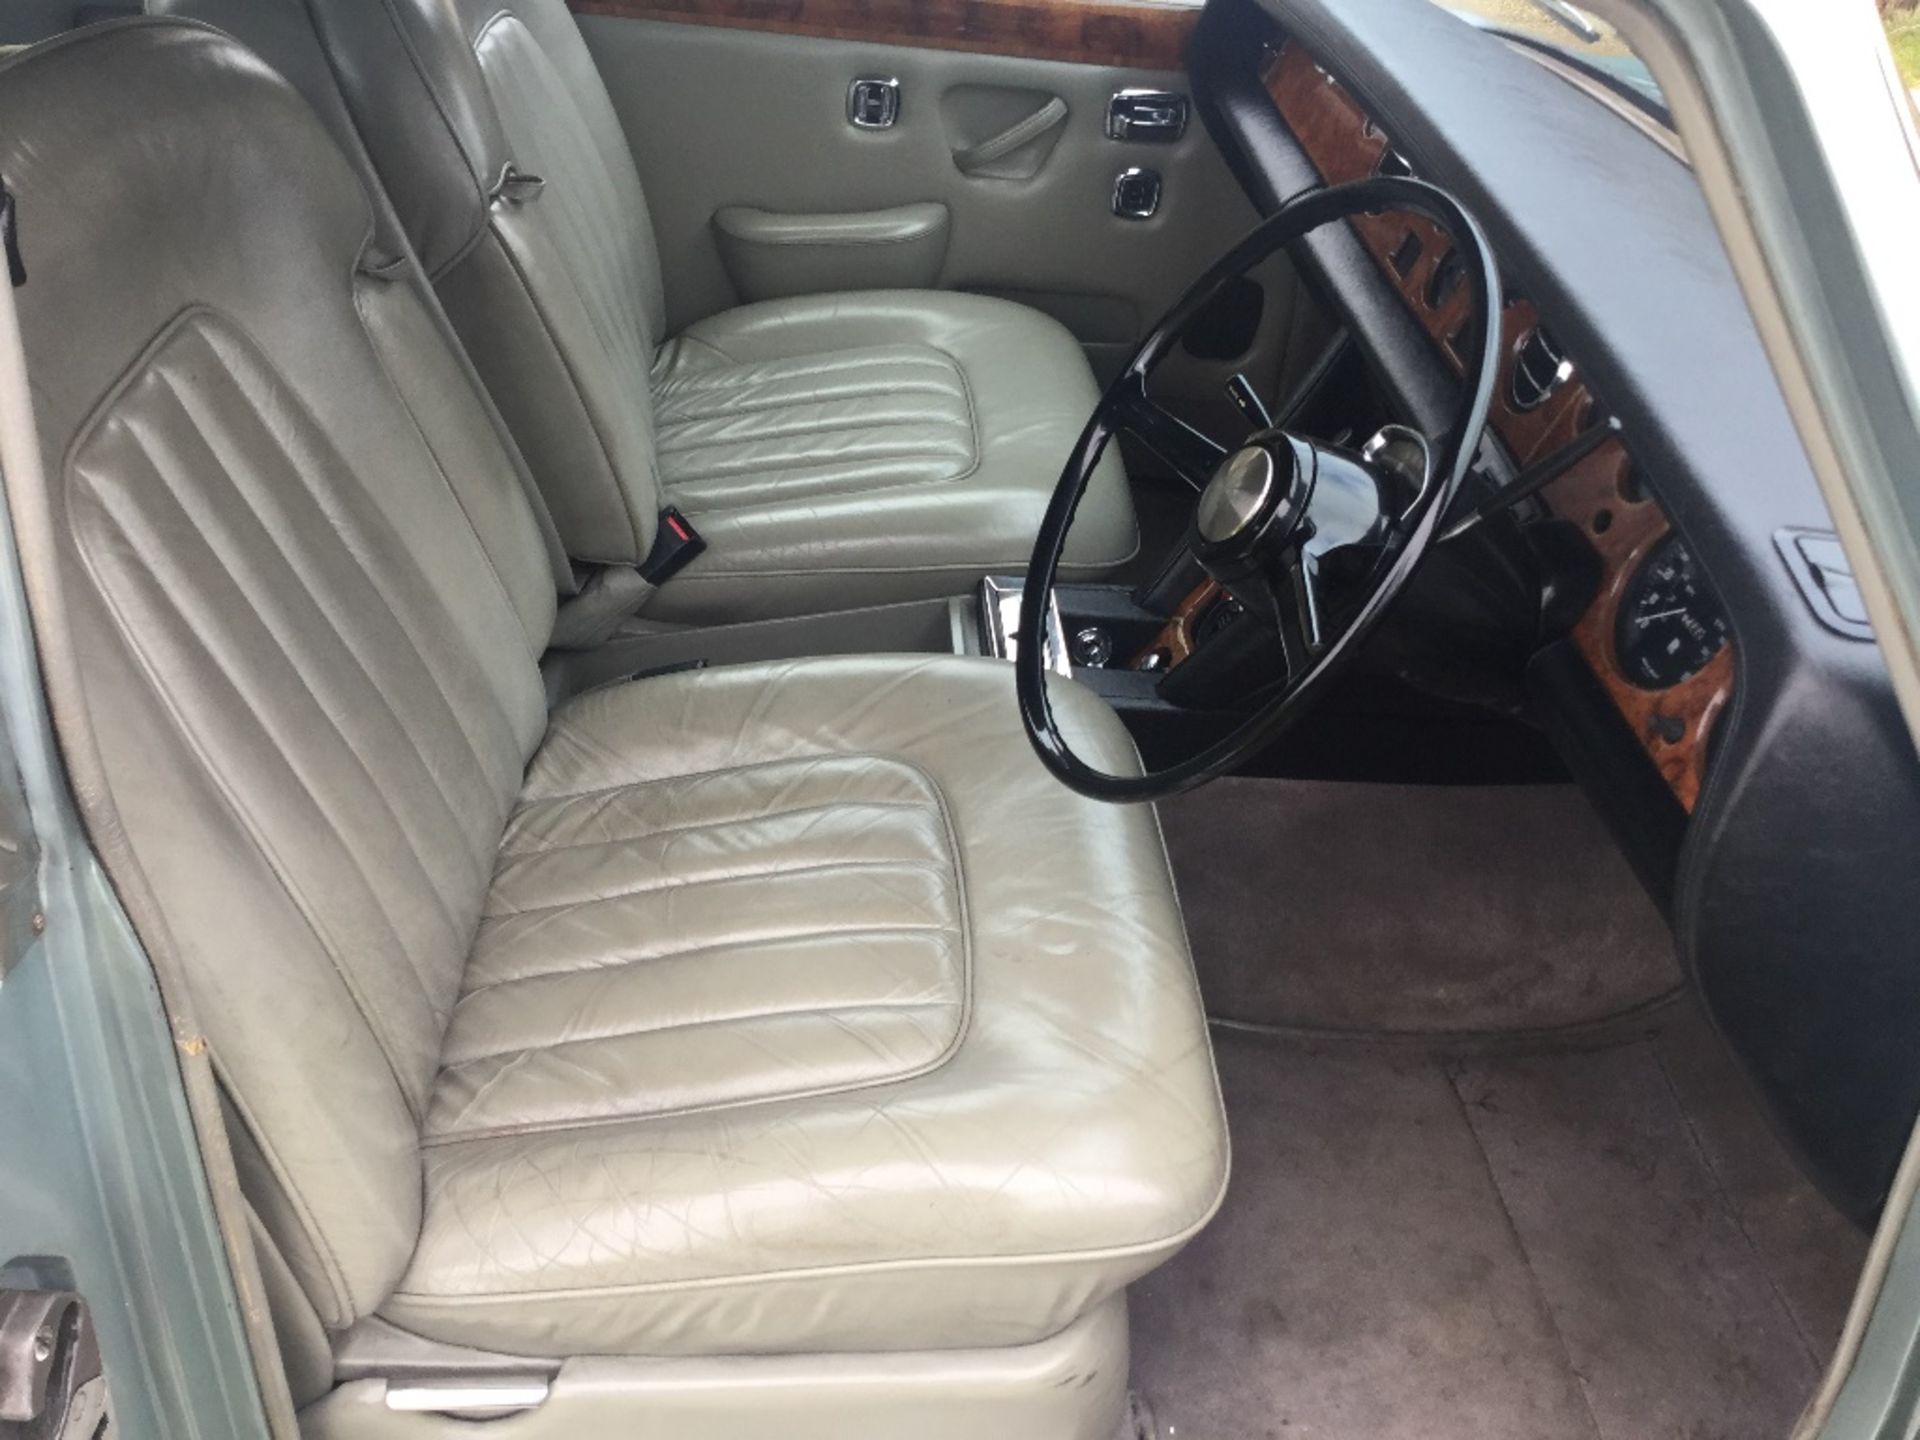 A 1973 Rolls Royce Silver Shadow I, registration number 840 FMP, opalescent silver blue metallic. - Image 2 of 5